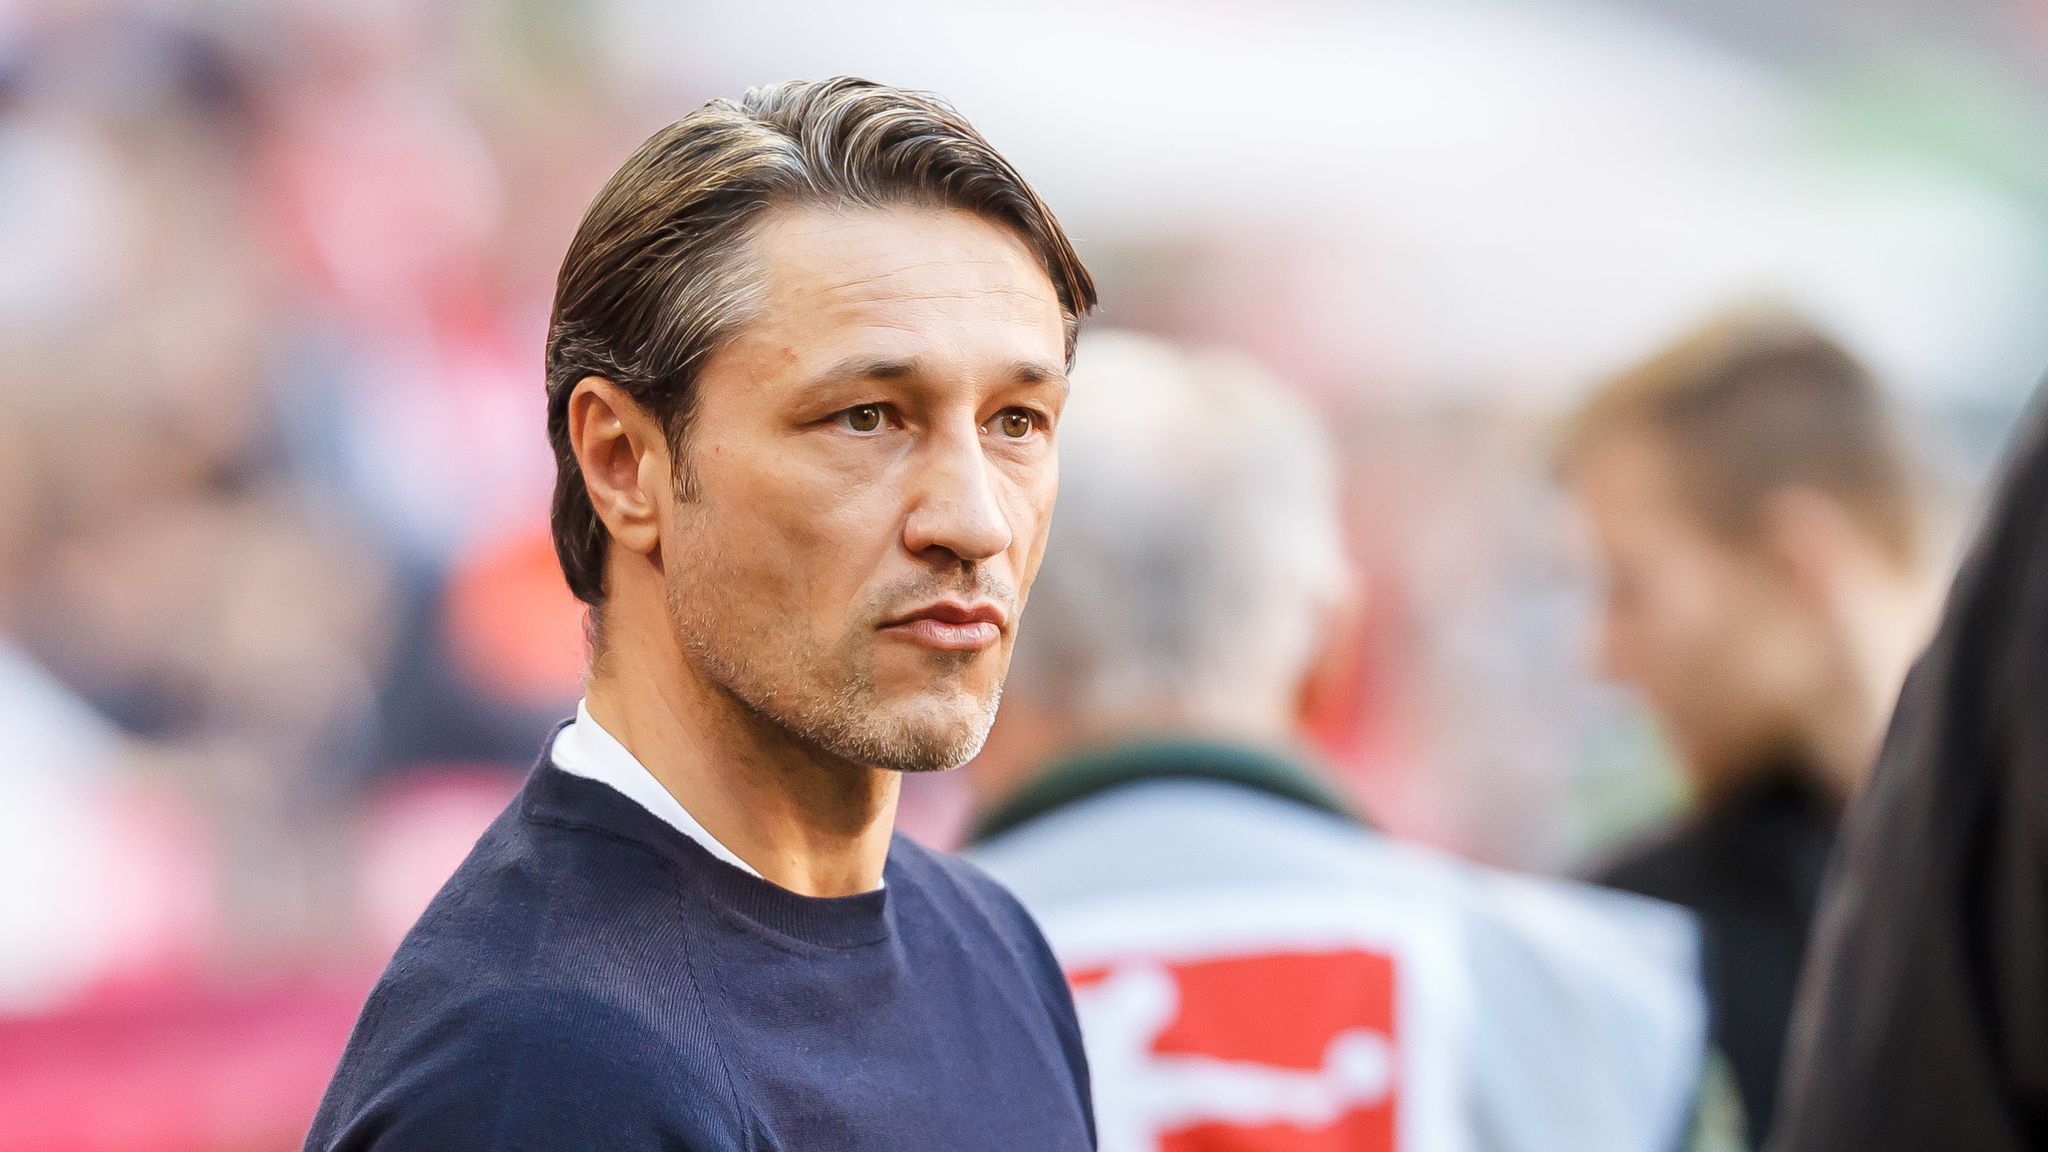 Niko Kovac emerges as surprise potential replacement for Jurgen Klopp at Liverpool. 